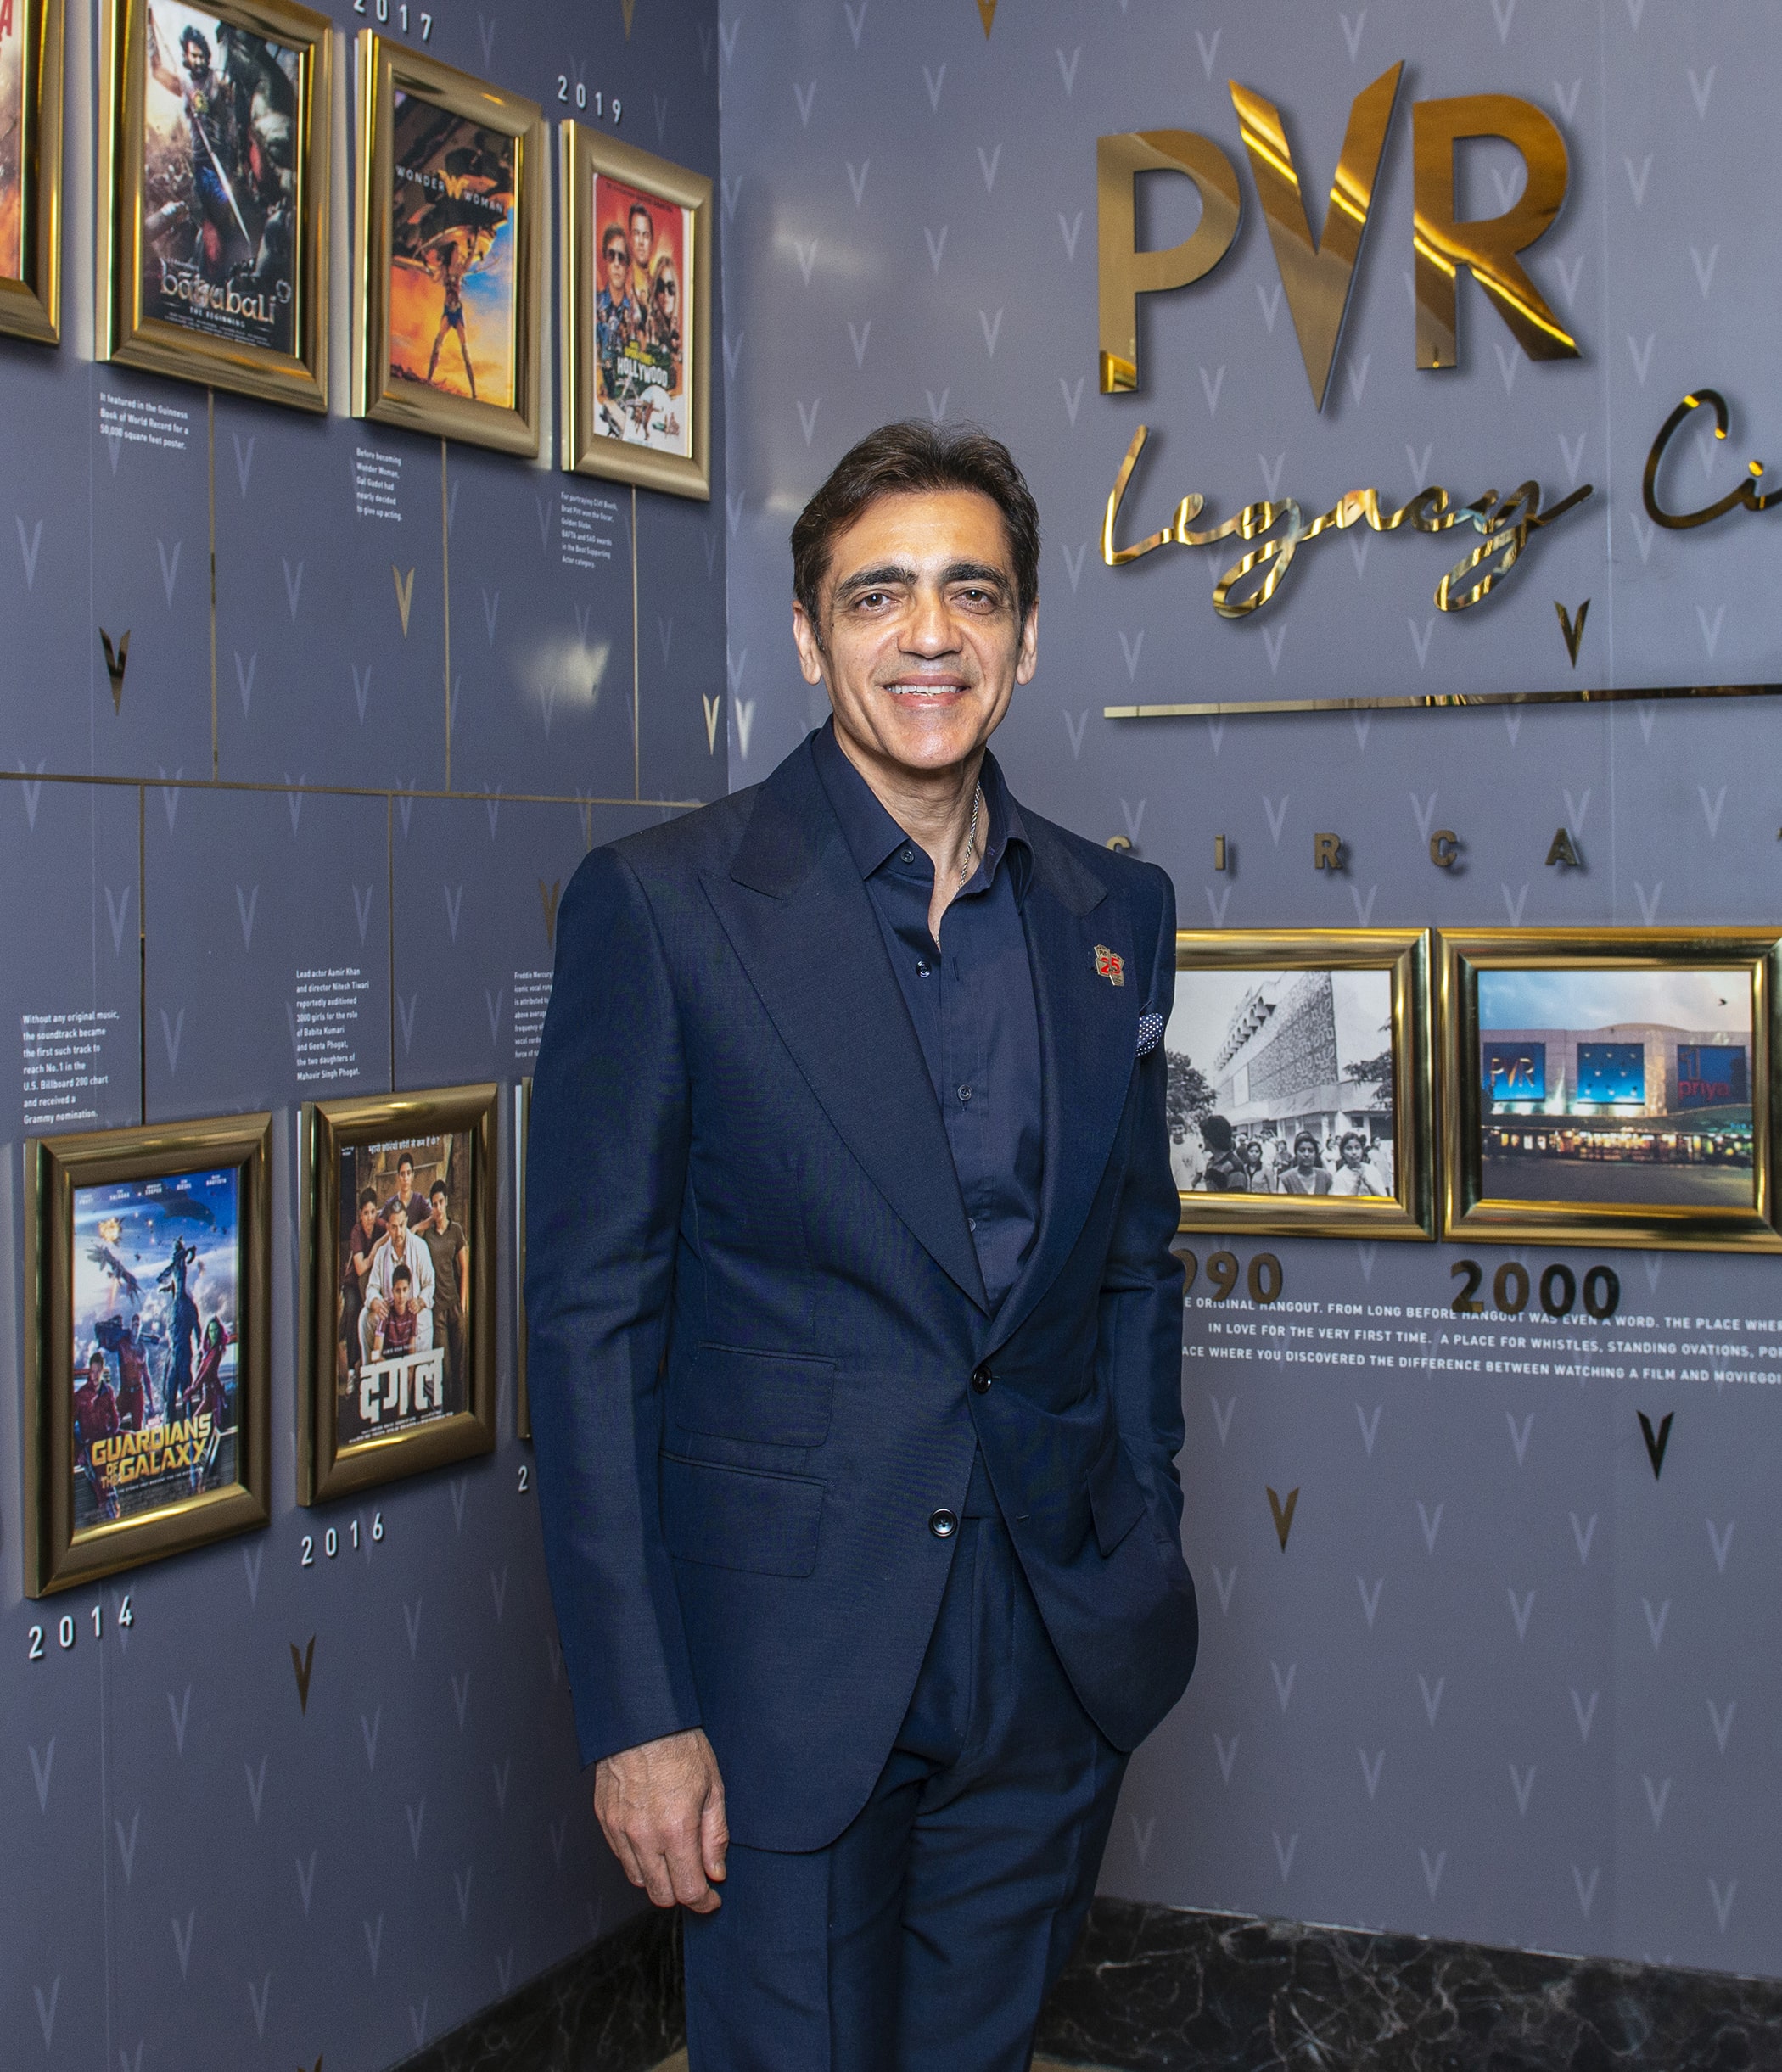 PVR LAUNCHES SOUTH INDIA’S FIRST DIRECTOR’S CUT IN BENGALURU